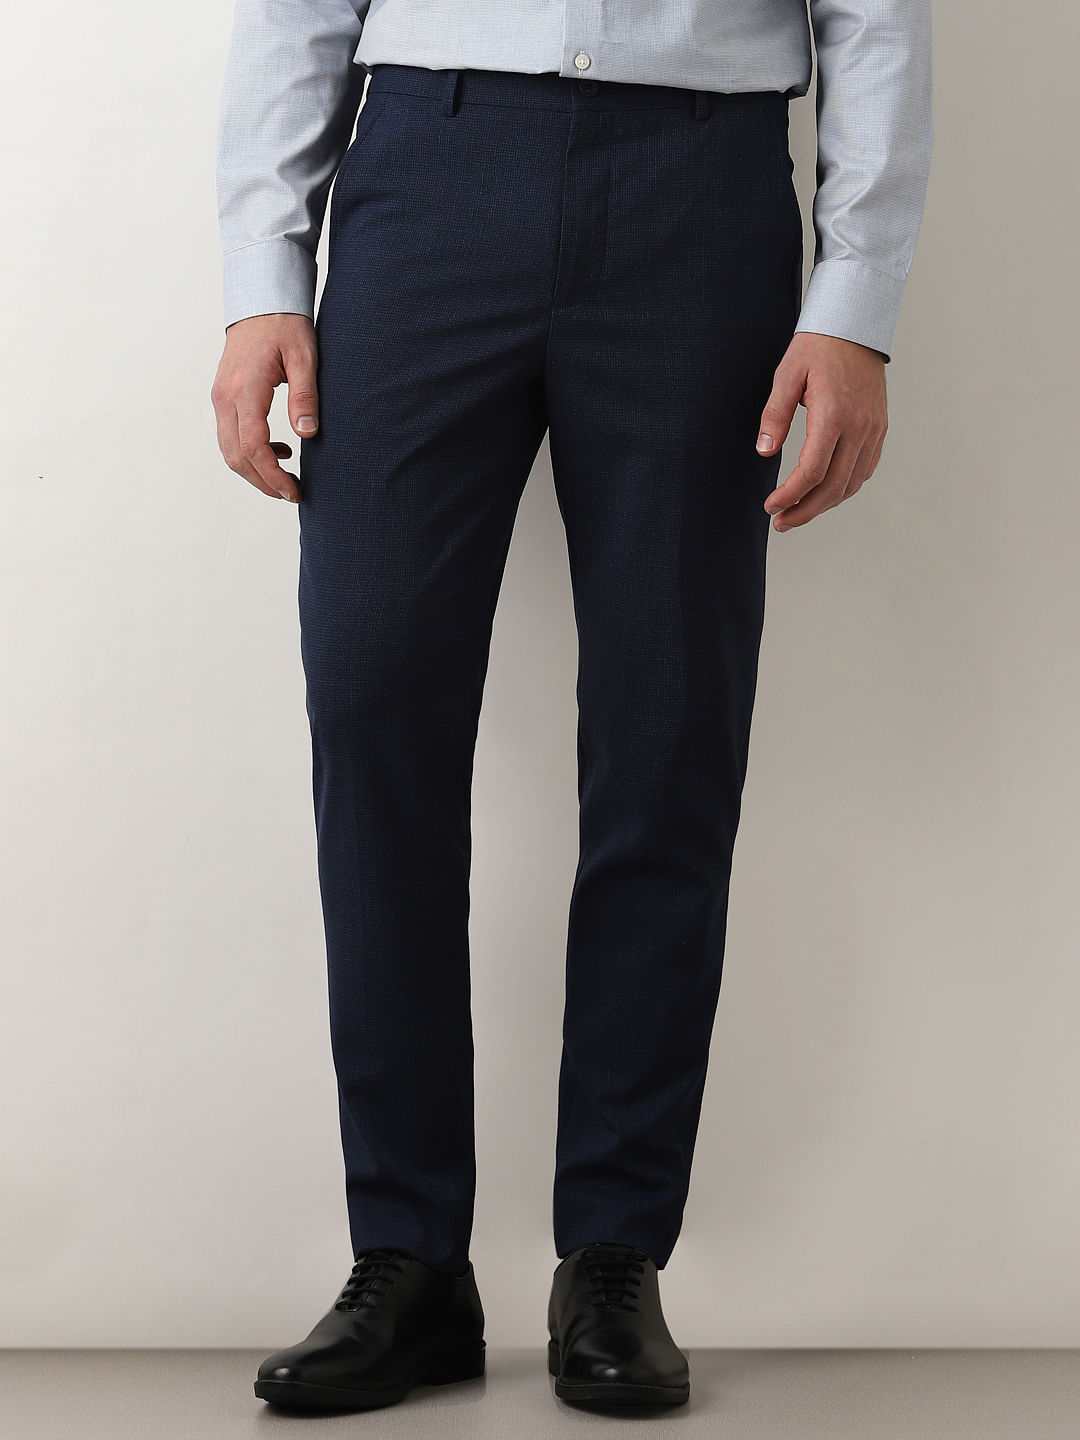 Which is the best brand for formal pants? - Quora